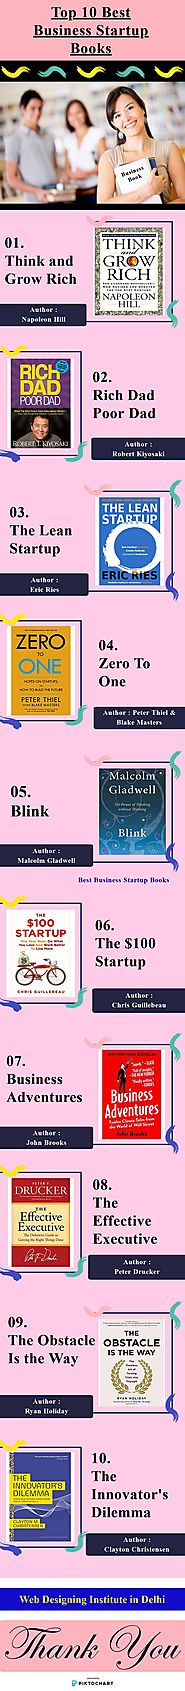 Best Startup Books - Infographic